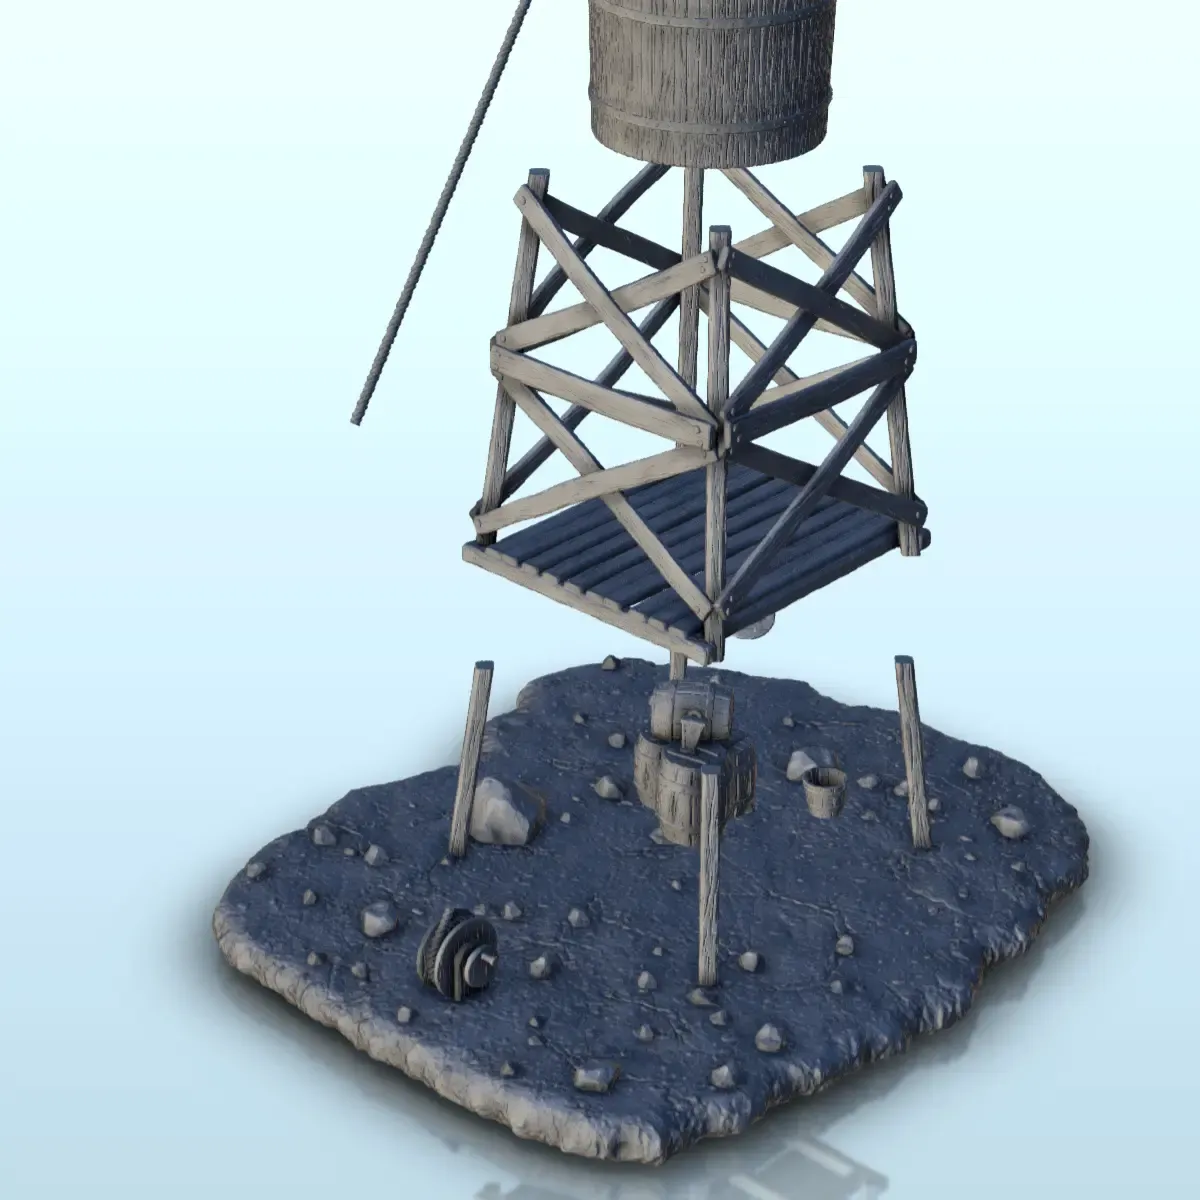 Double water tank with pulley - Terrain scenery West Old